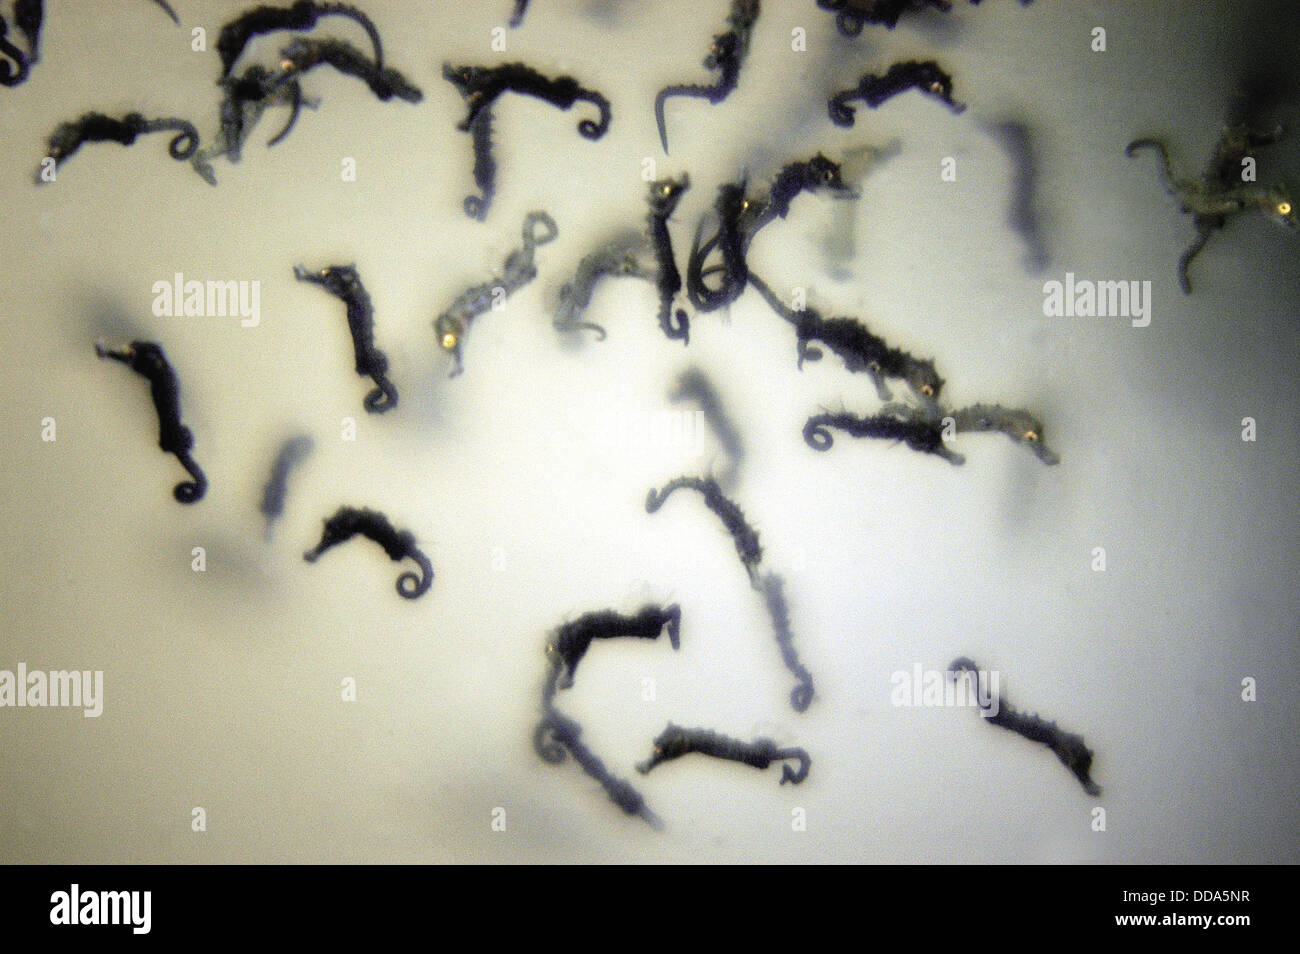 Northern or lined seahorse babies, Hippocampus erectus in a tank Stock ...